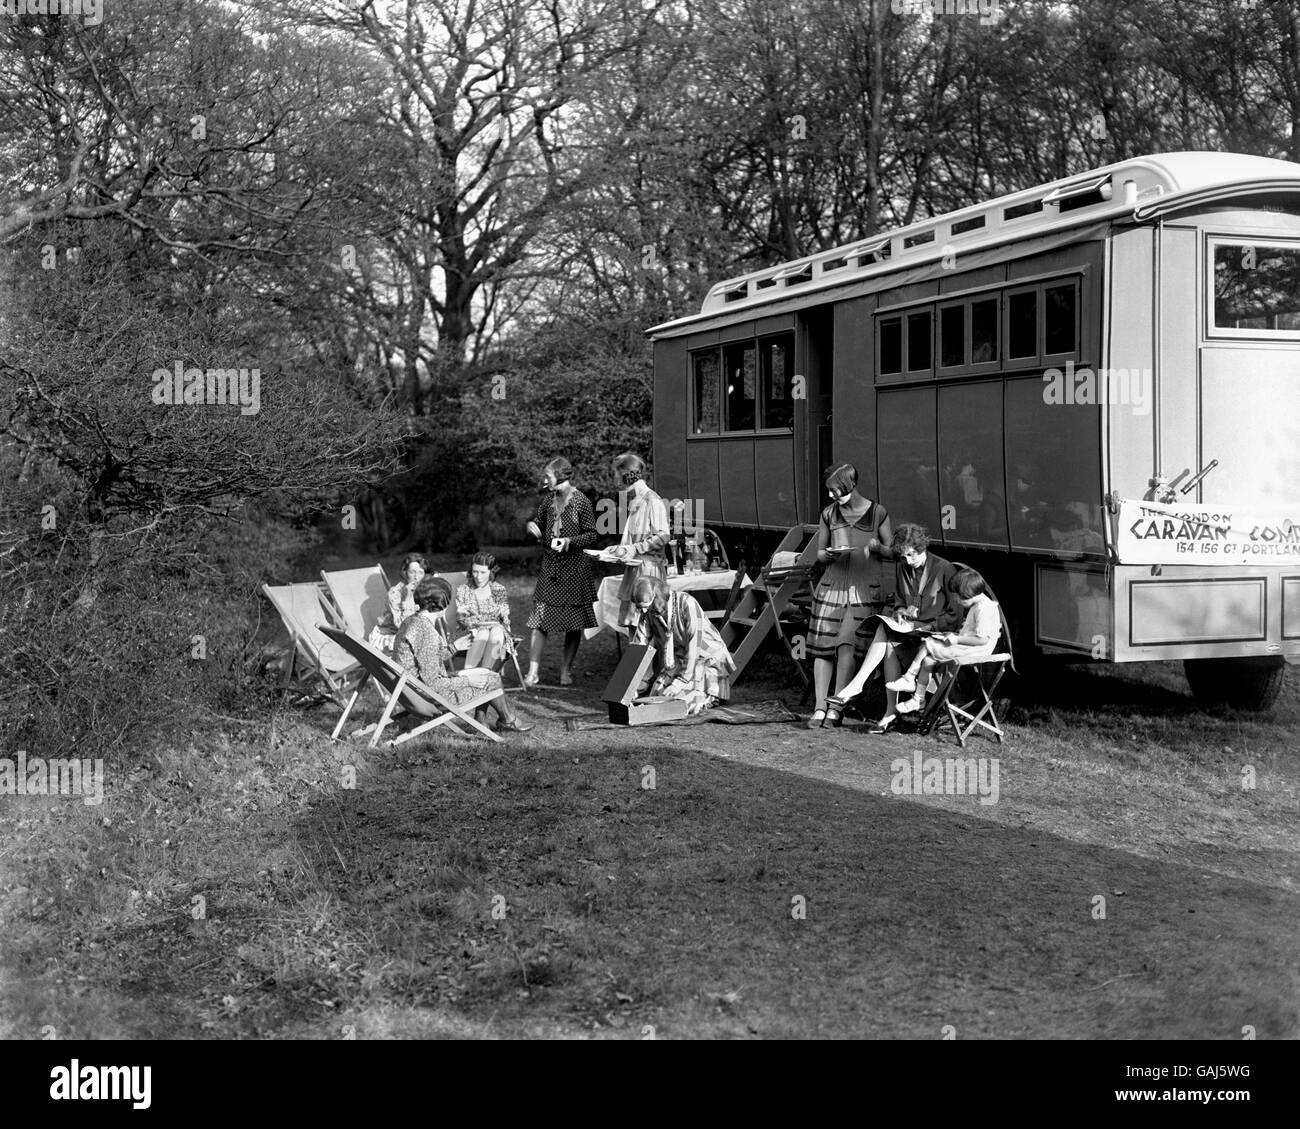 Holiday makers with a trailer caravan, solving many difficulties for those who want to see Britain. Caravanning was to become increasingly more popular from the mid 1930's. Stock Photo